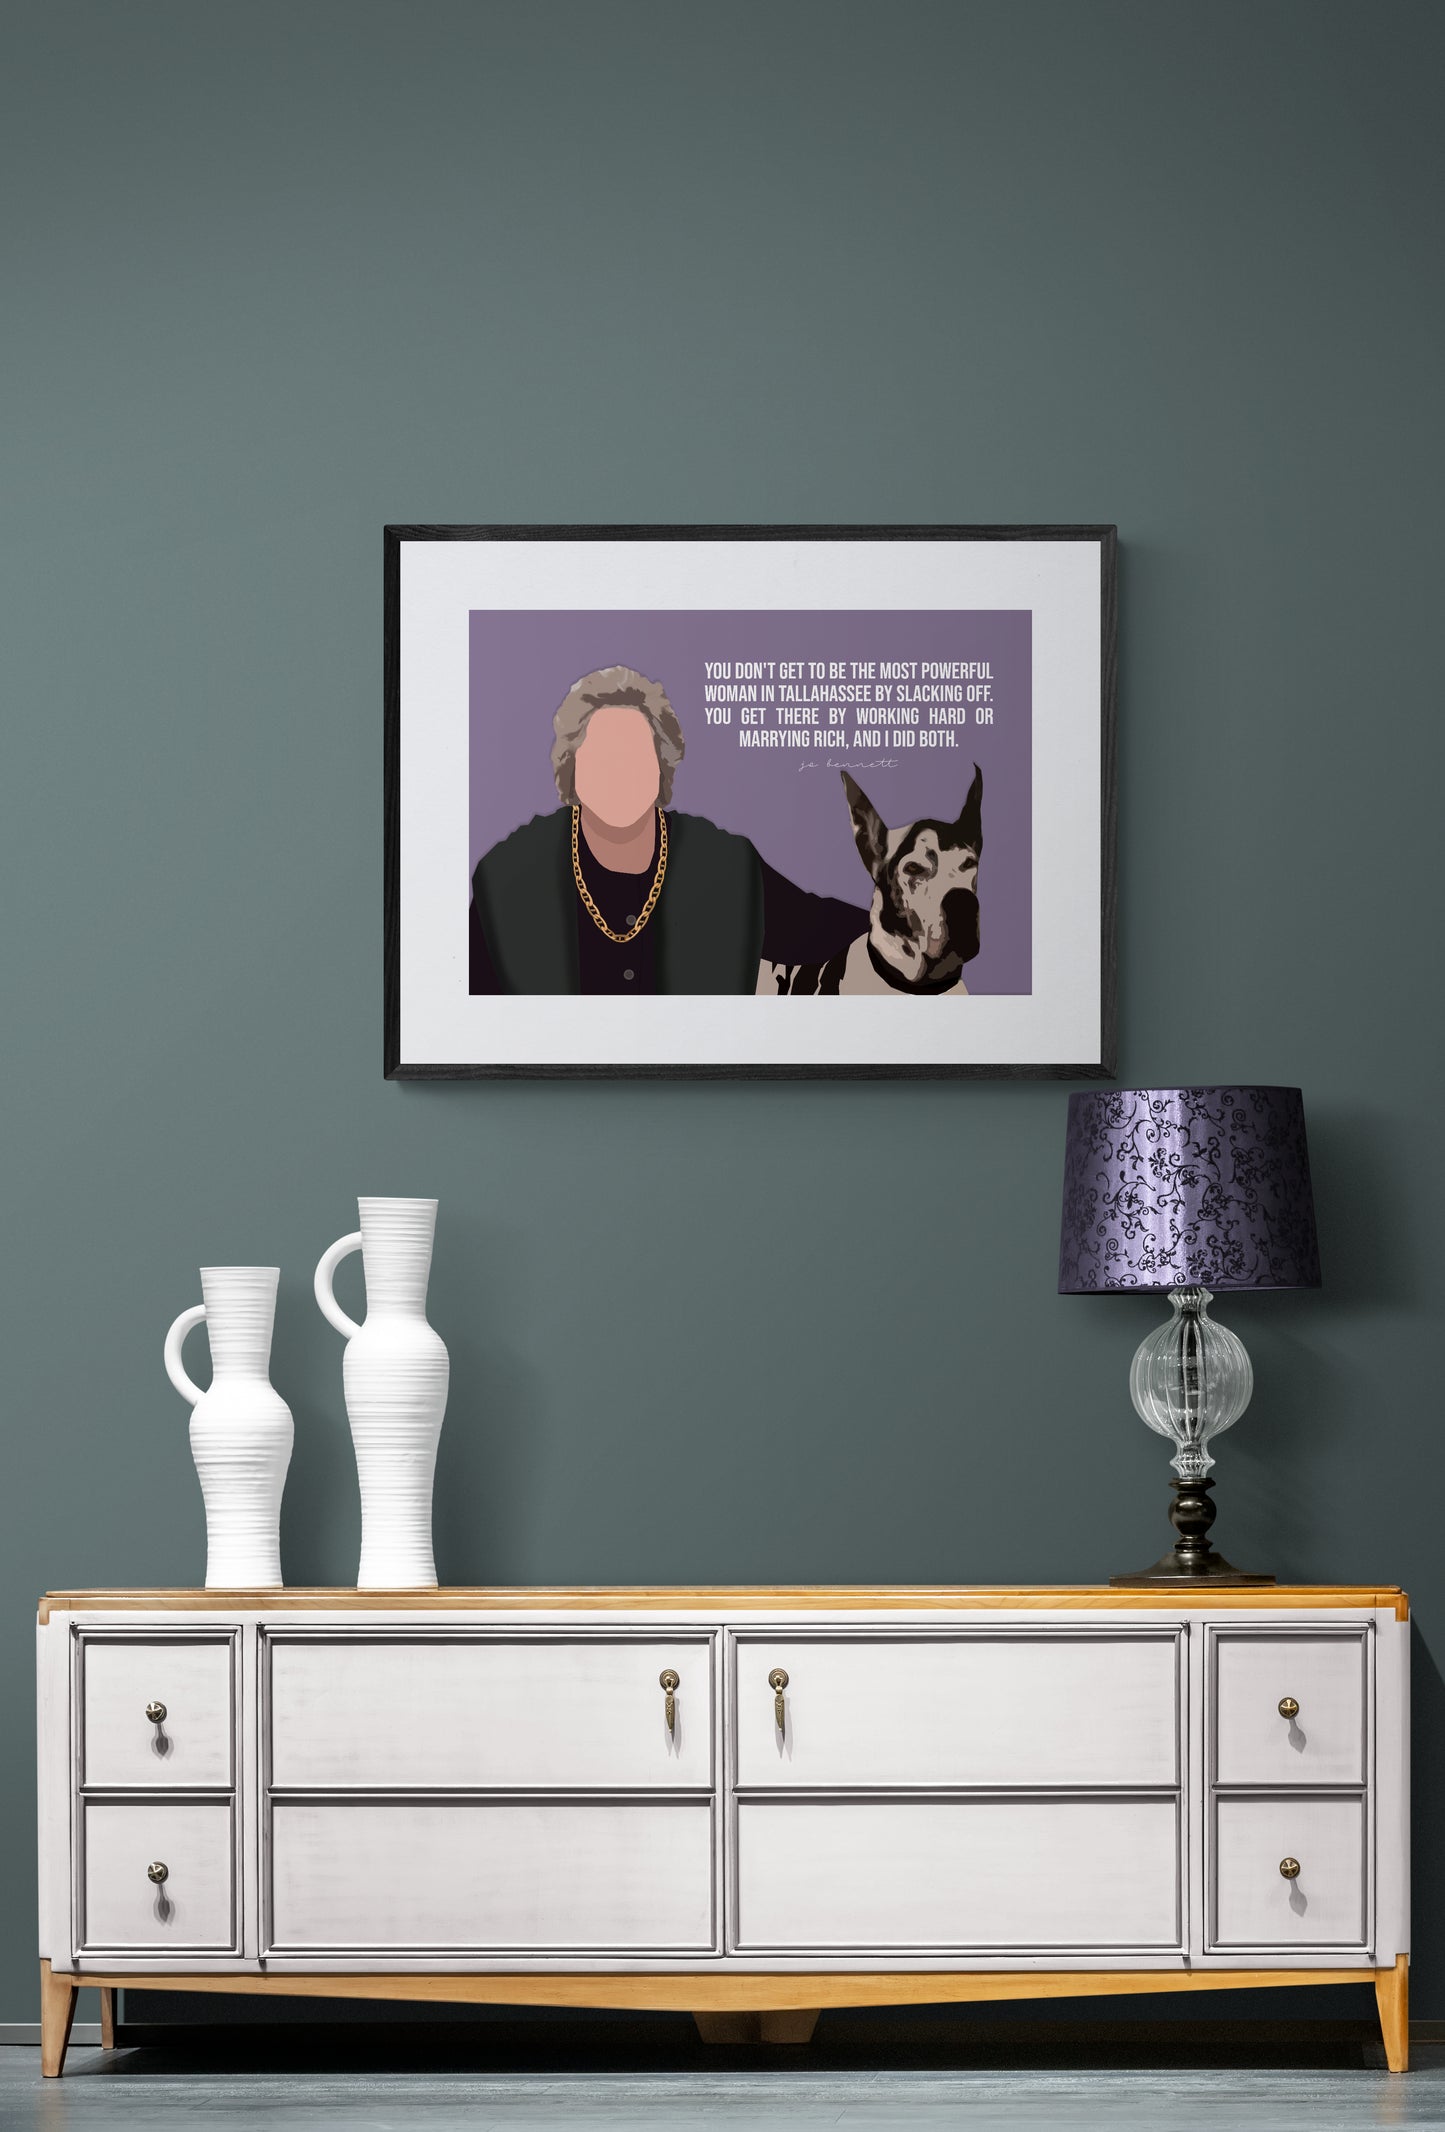 The Office Kathy Bates - Jo Bennett funny quote poster with dog